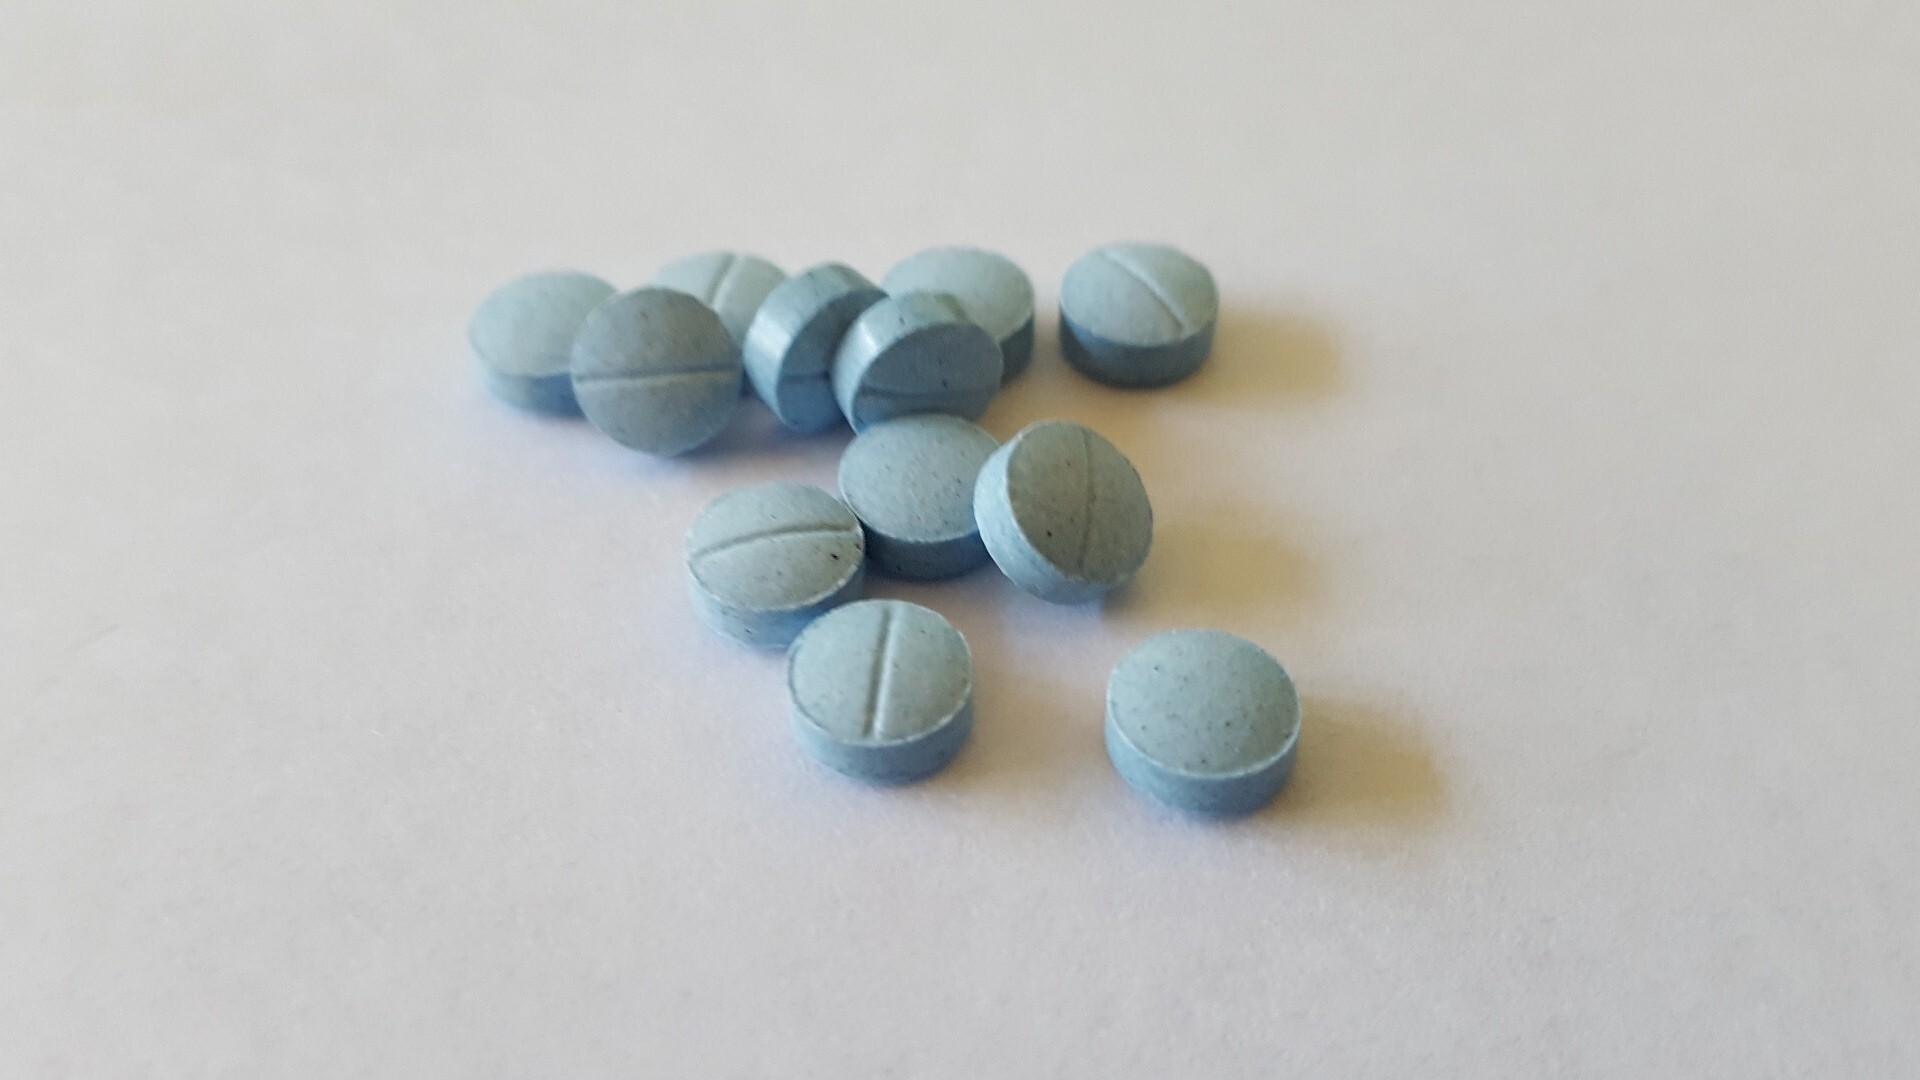 Efficacy and Safety of Fast Etizolam 1mg in Anxiety Disorders